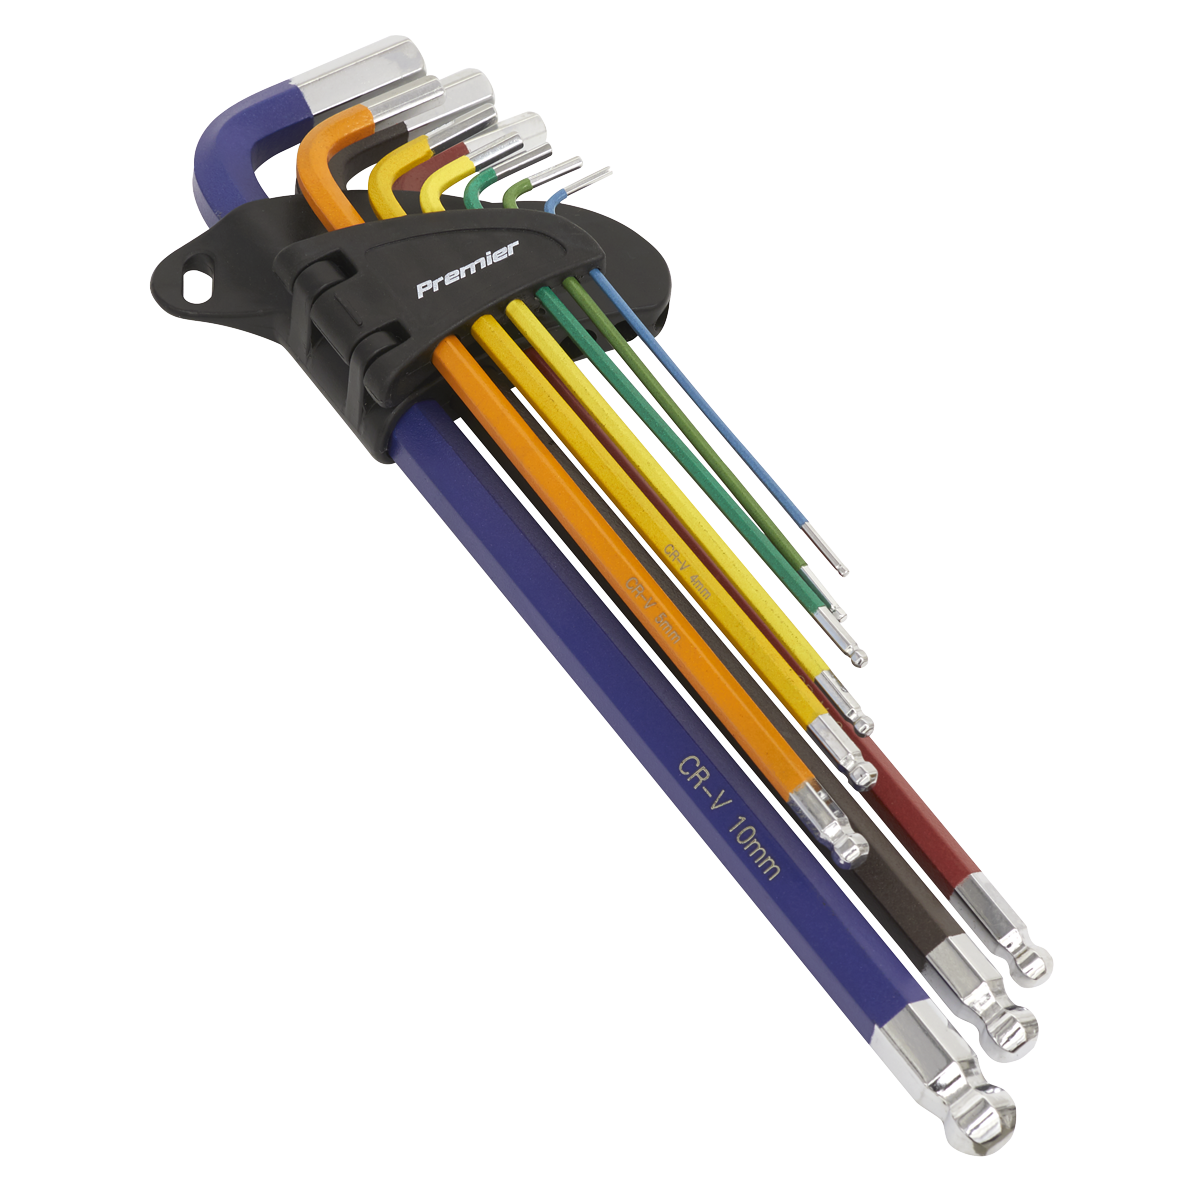 Sealey Ball-End Hex Key Set 9pc Colour-Coded Extra-Long Metric